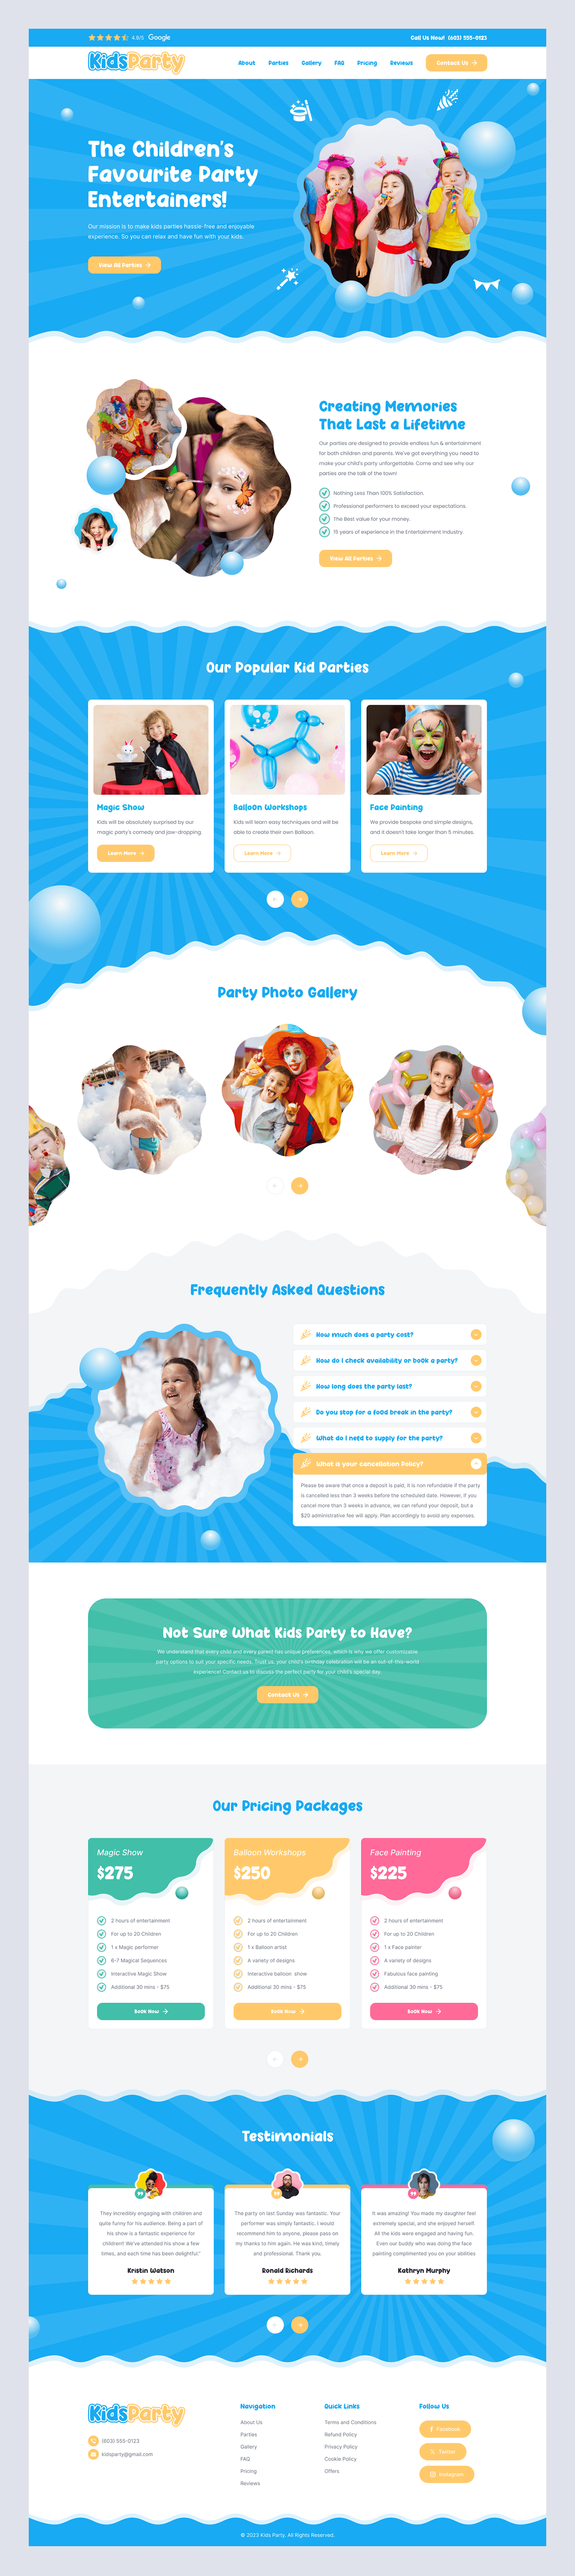 Foam party Face painting MAGIC SHOW party kids children Birthday landing page Website Design Website